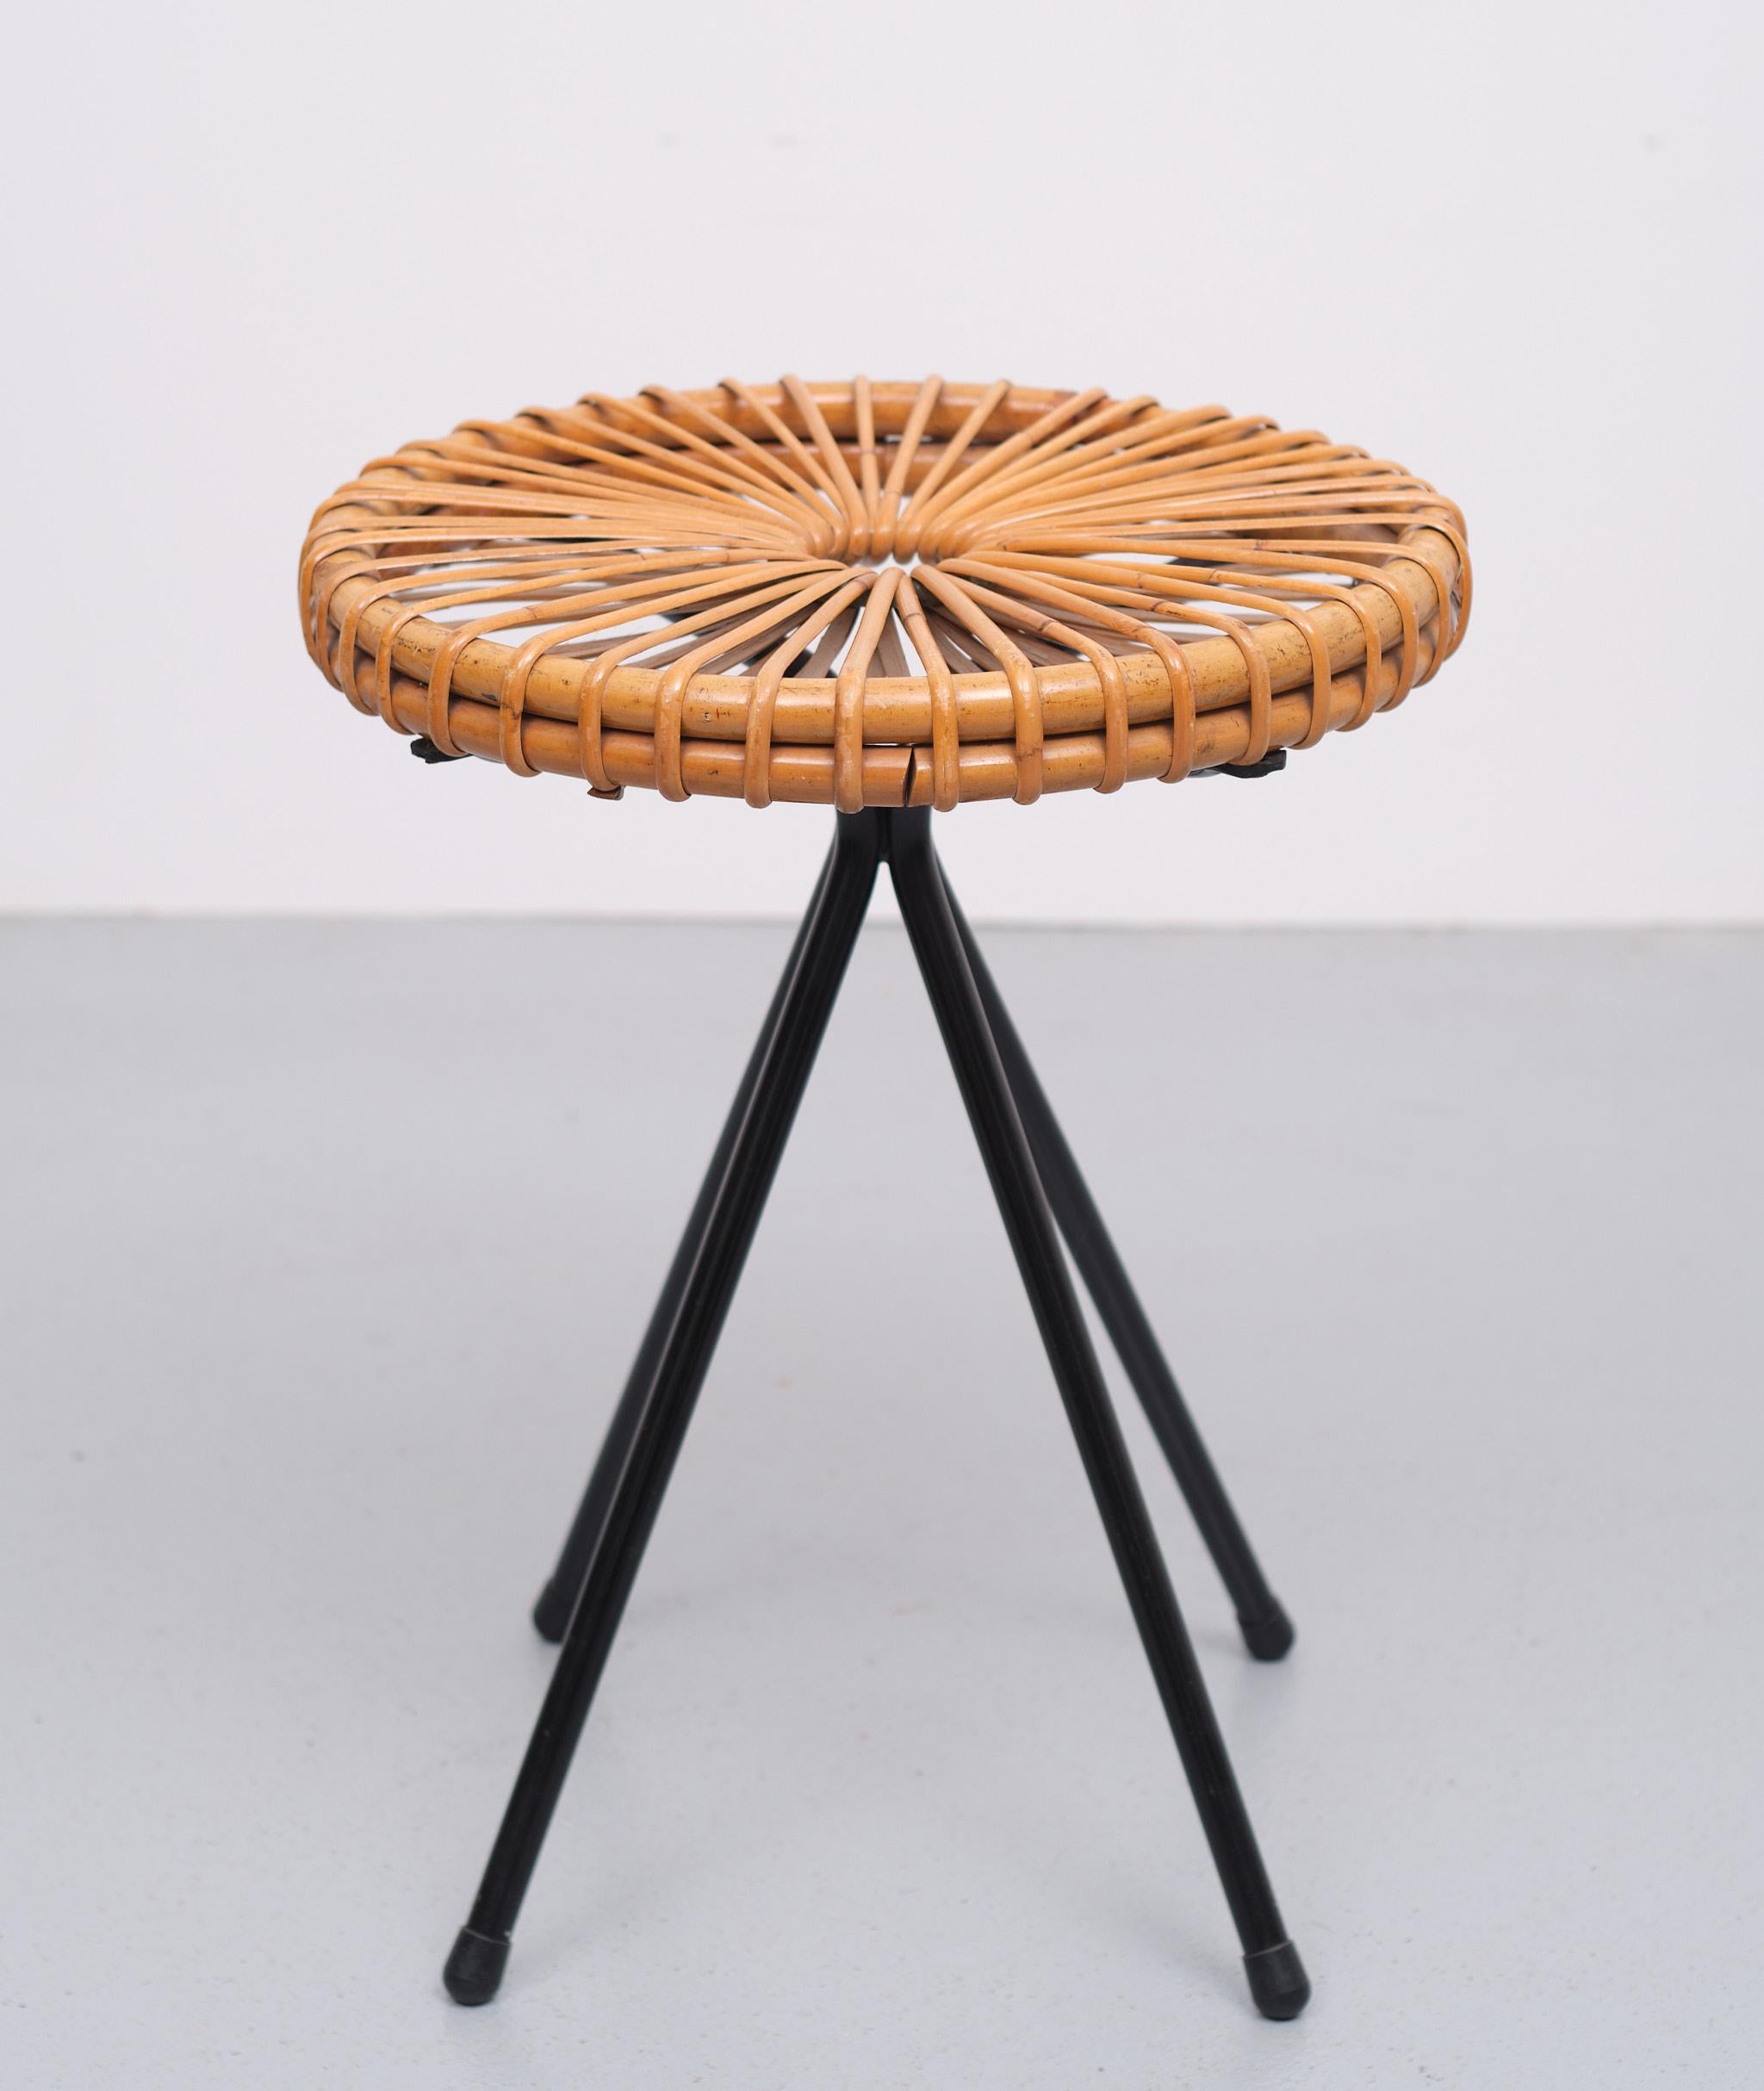 Very nice stool, Manufactured by Rohe Noordwolde Holland 1950s 
Four Metal legs, comes with a Wicker seat. Good condition. 
Great looking piece.